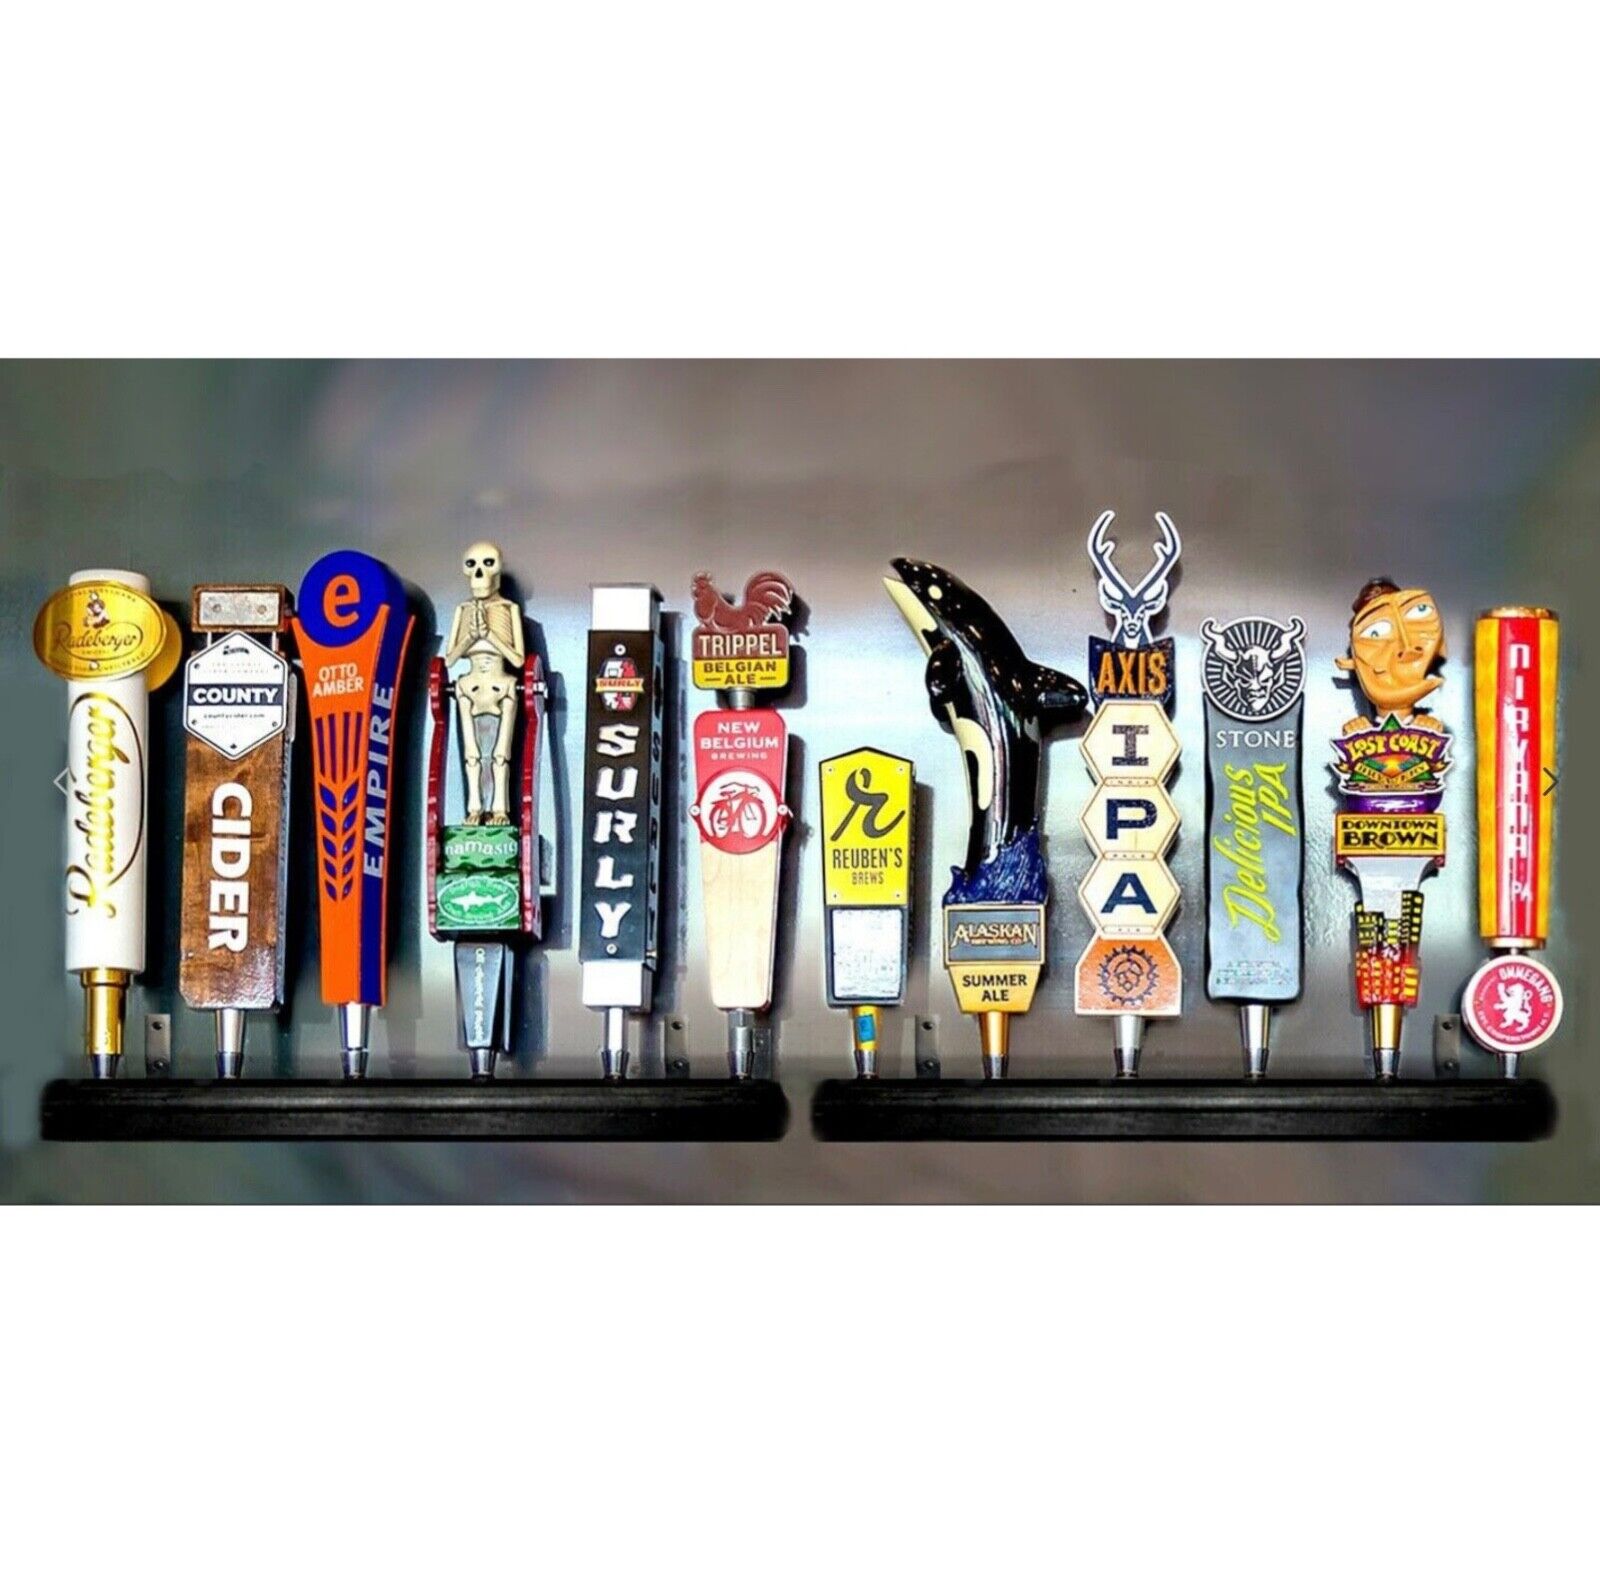 12 SPOT BEER TAP HANDLE DISPLAY  WALL MOUNTED LOT OF 2 ea 6tap W/ BRACKETS